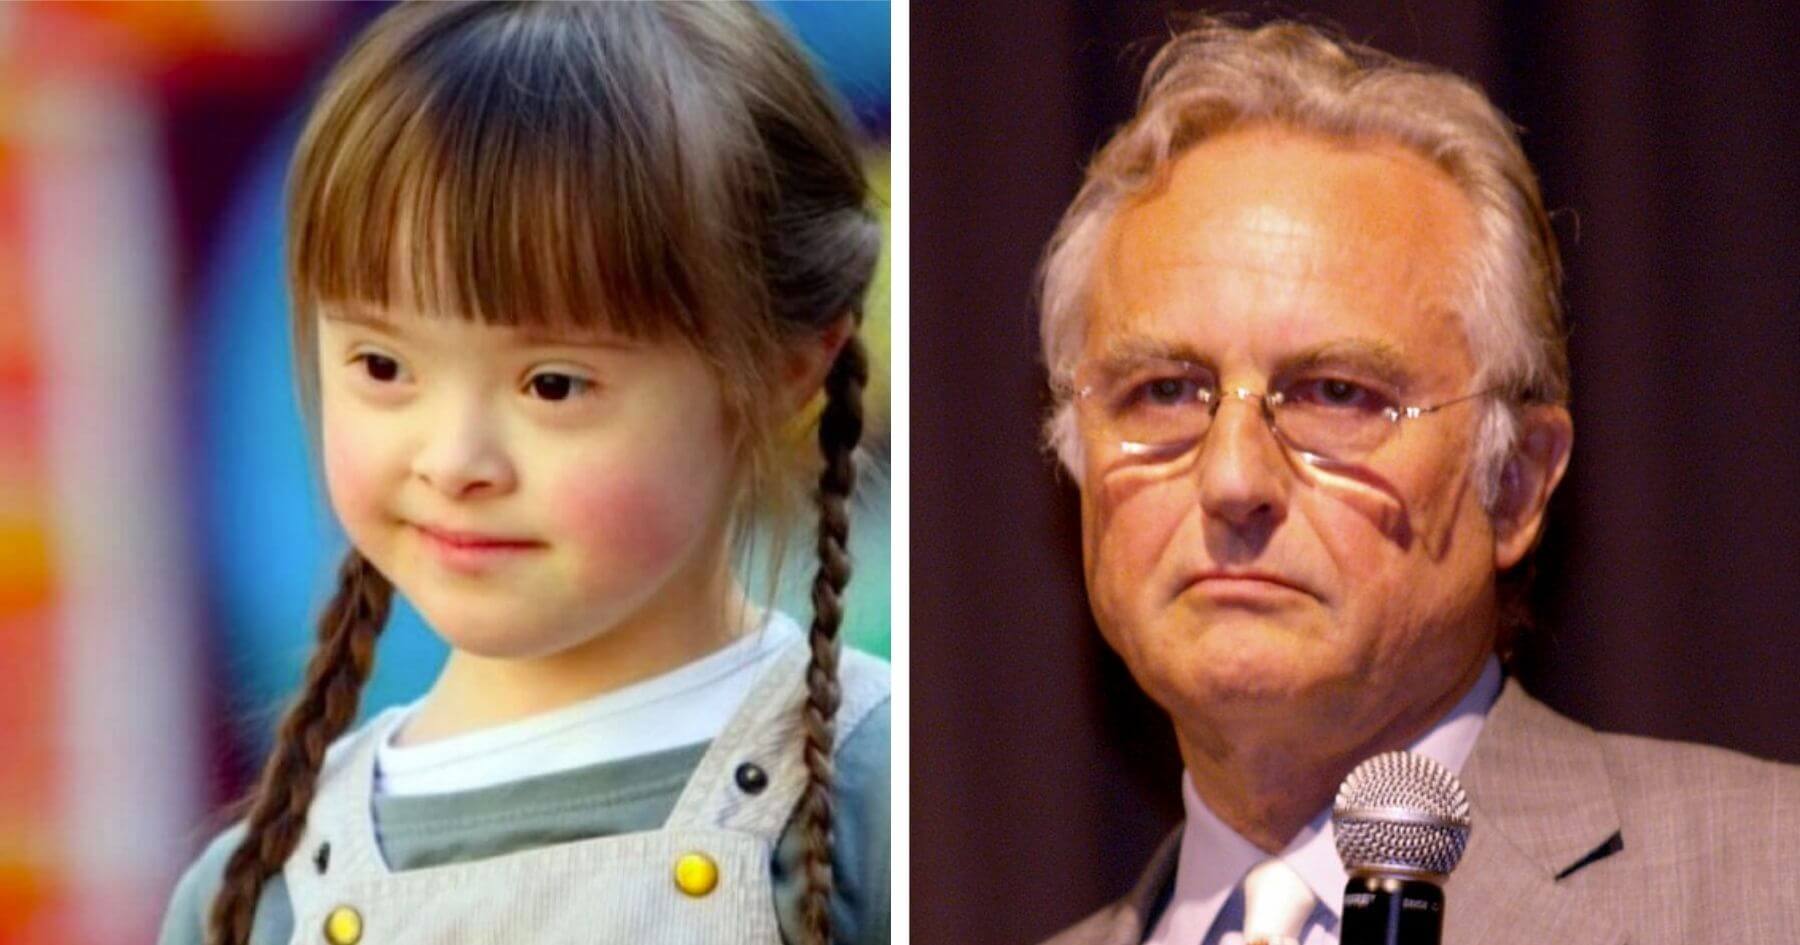 2,700 people with Down’s syndrome & their families call on Penguin Random House to cut ties with Richard Dawkins for offensive views on Down’s syndrome